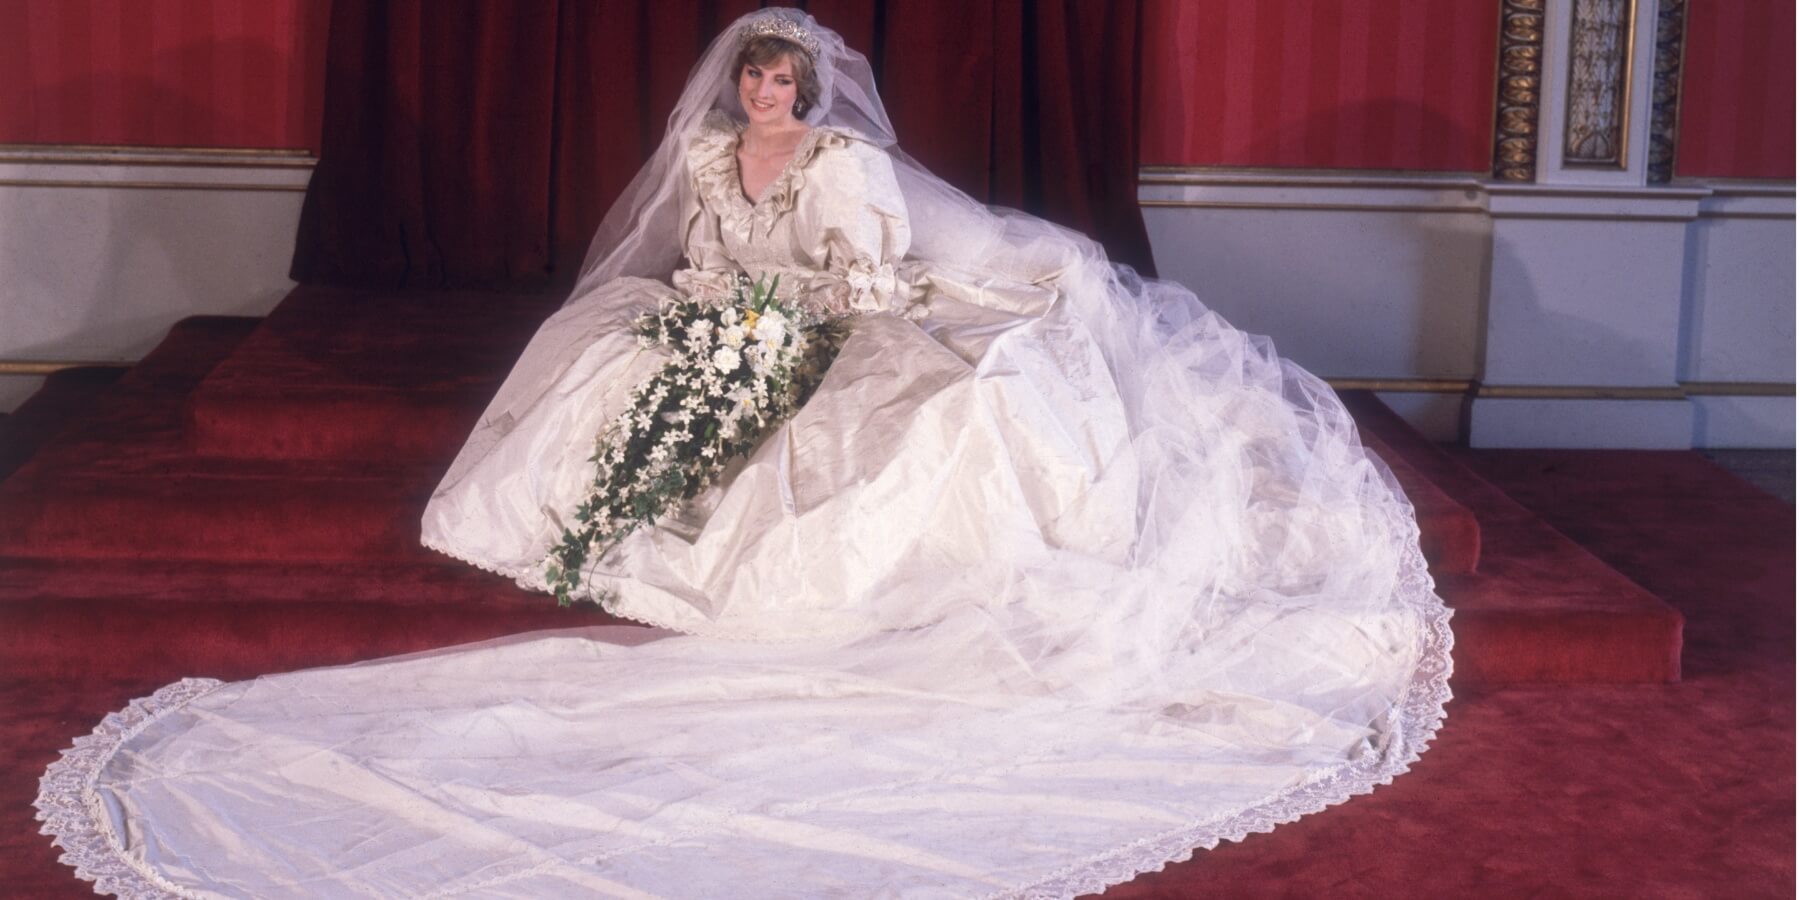 Princess Diana on her wedding day to Prince Charles in July 1981.